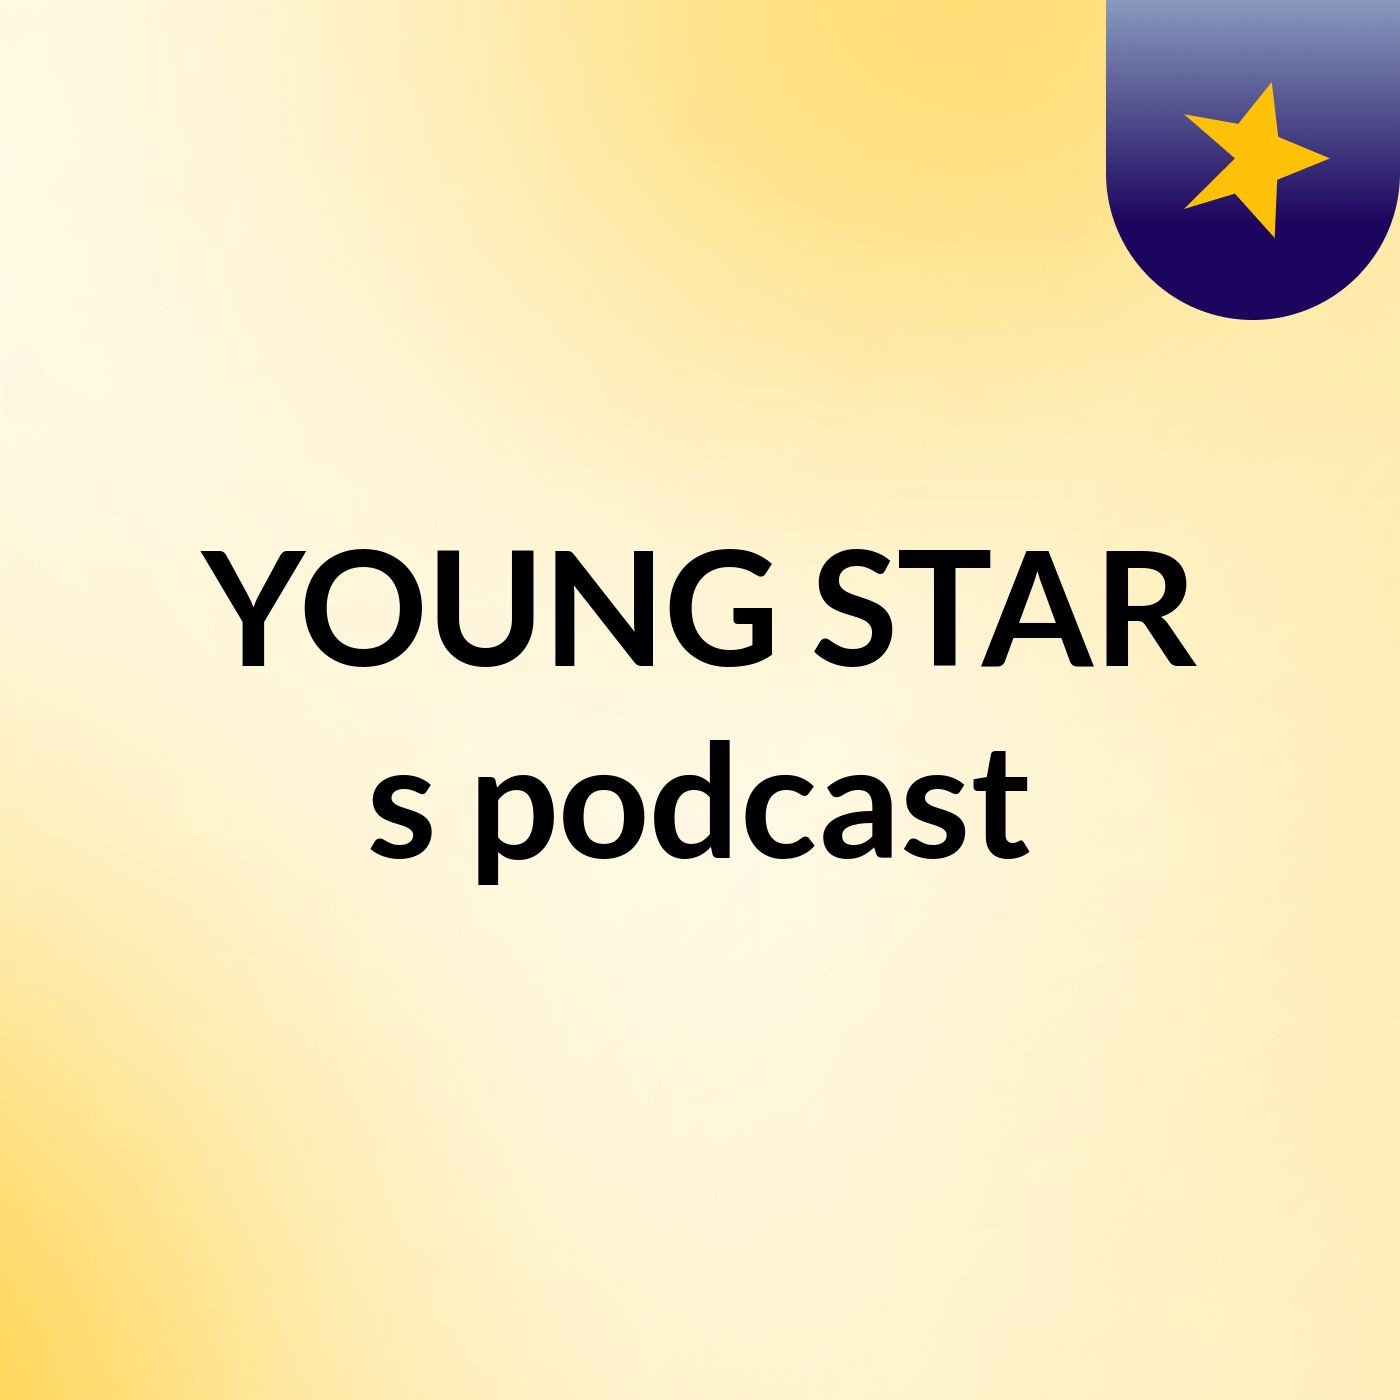 YOUNG STAR's podcast